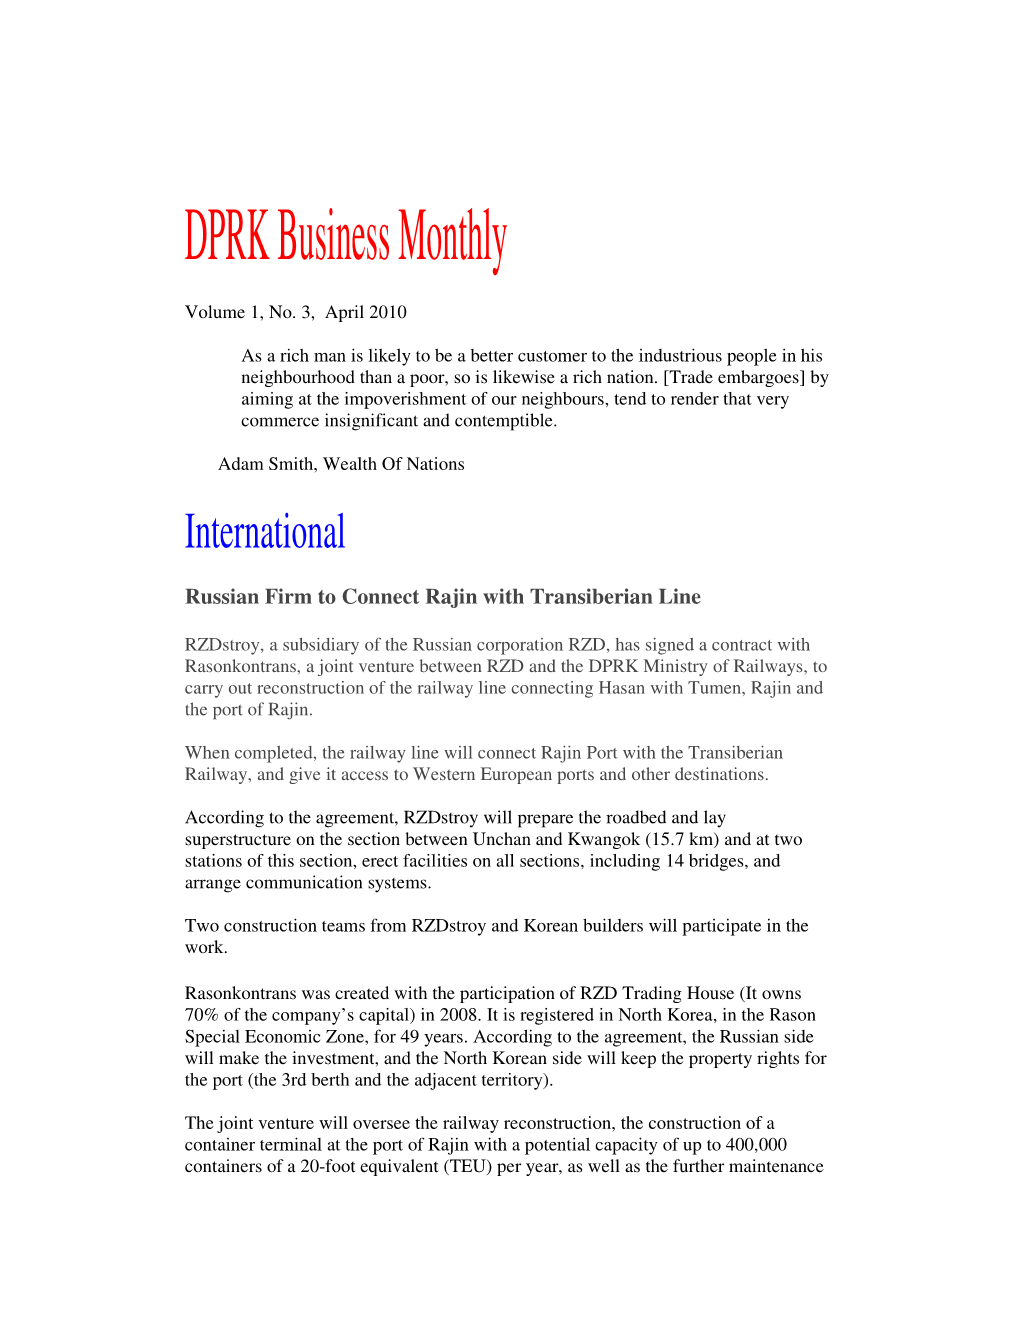 DPRK Business Monthly Volume 1, No